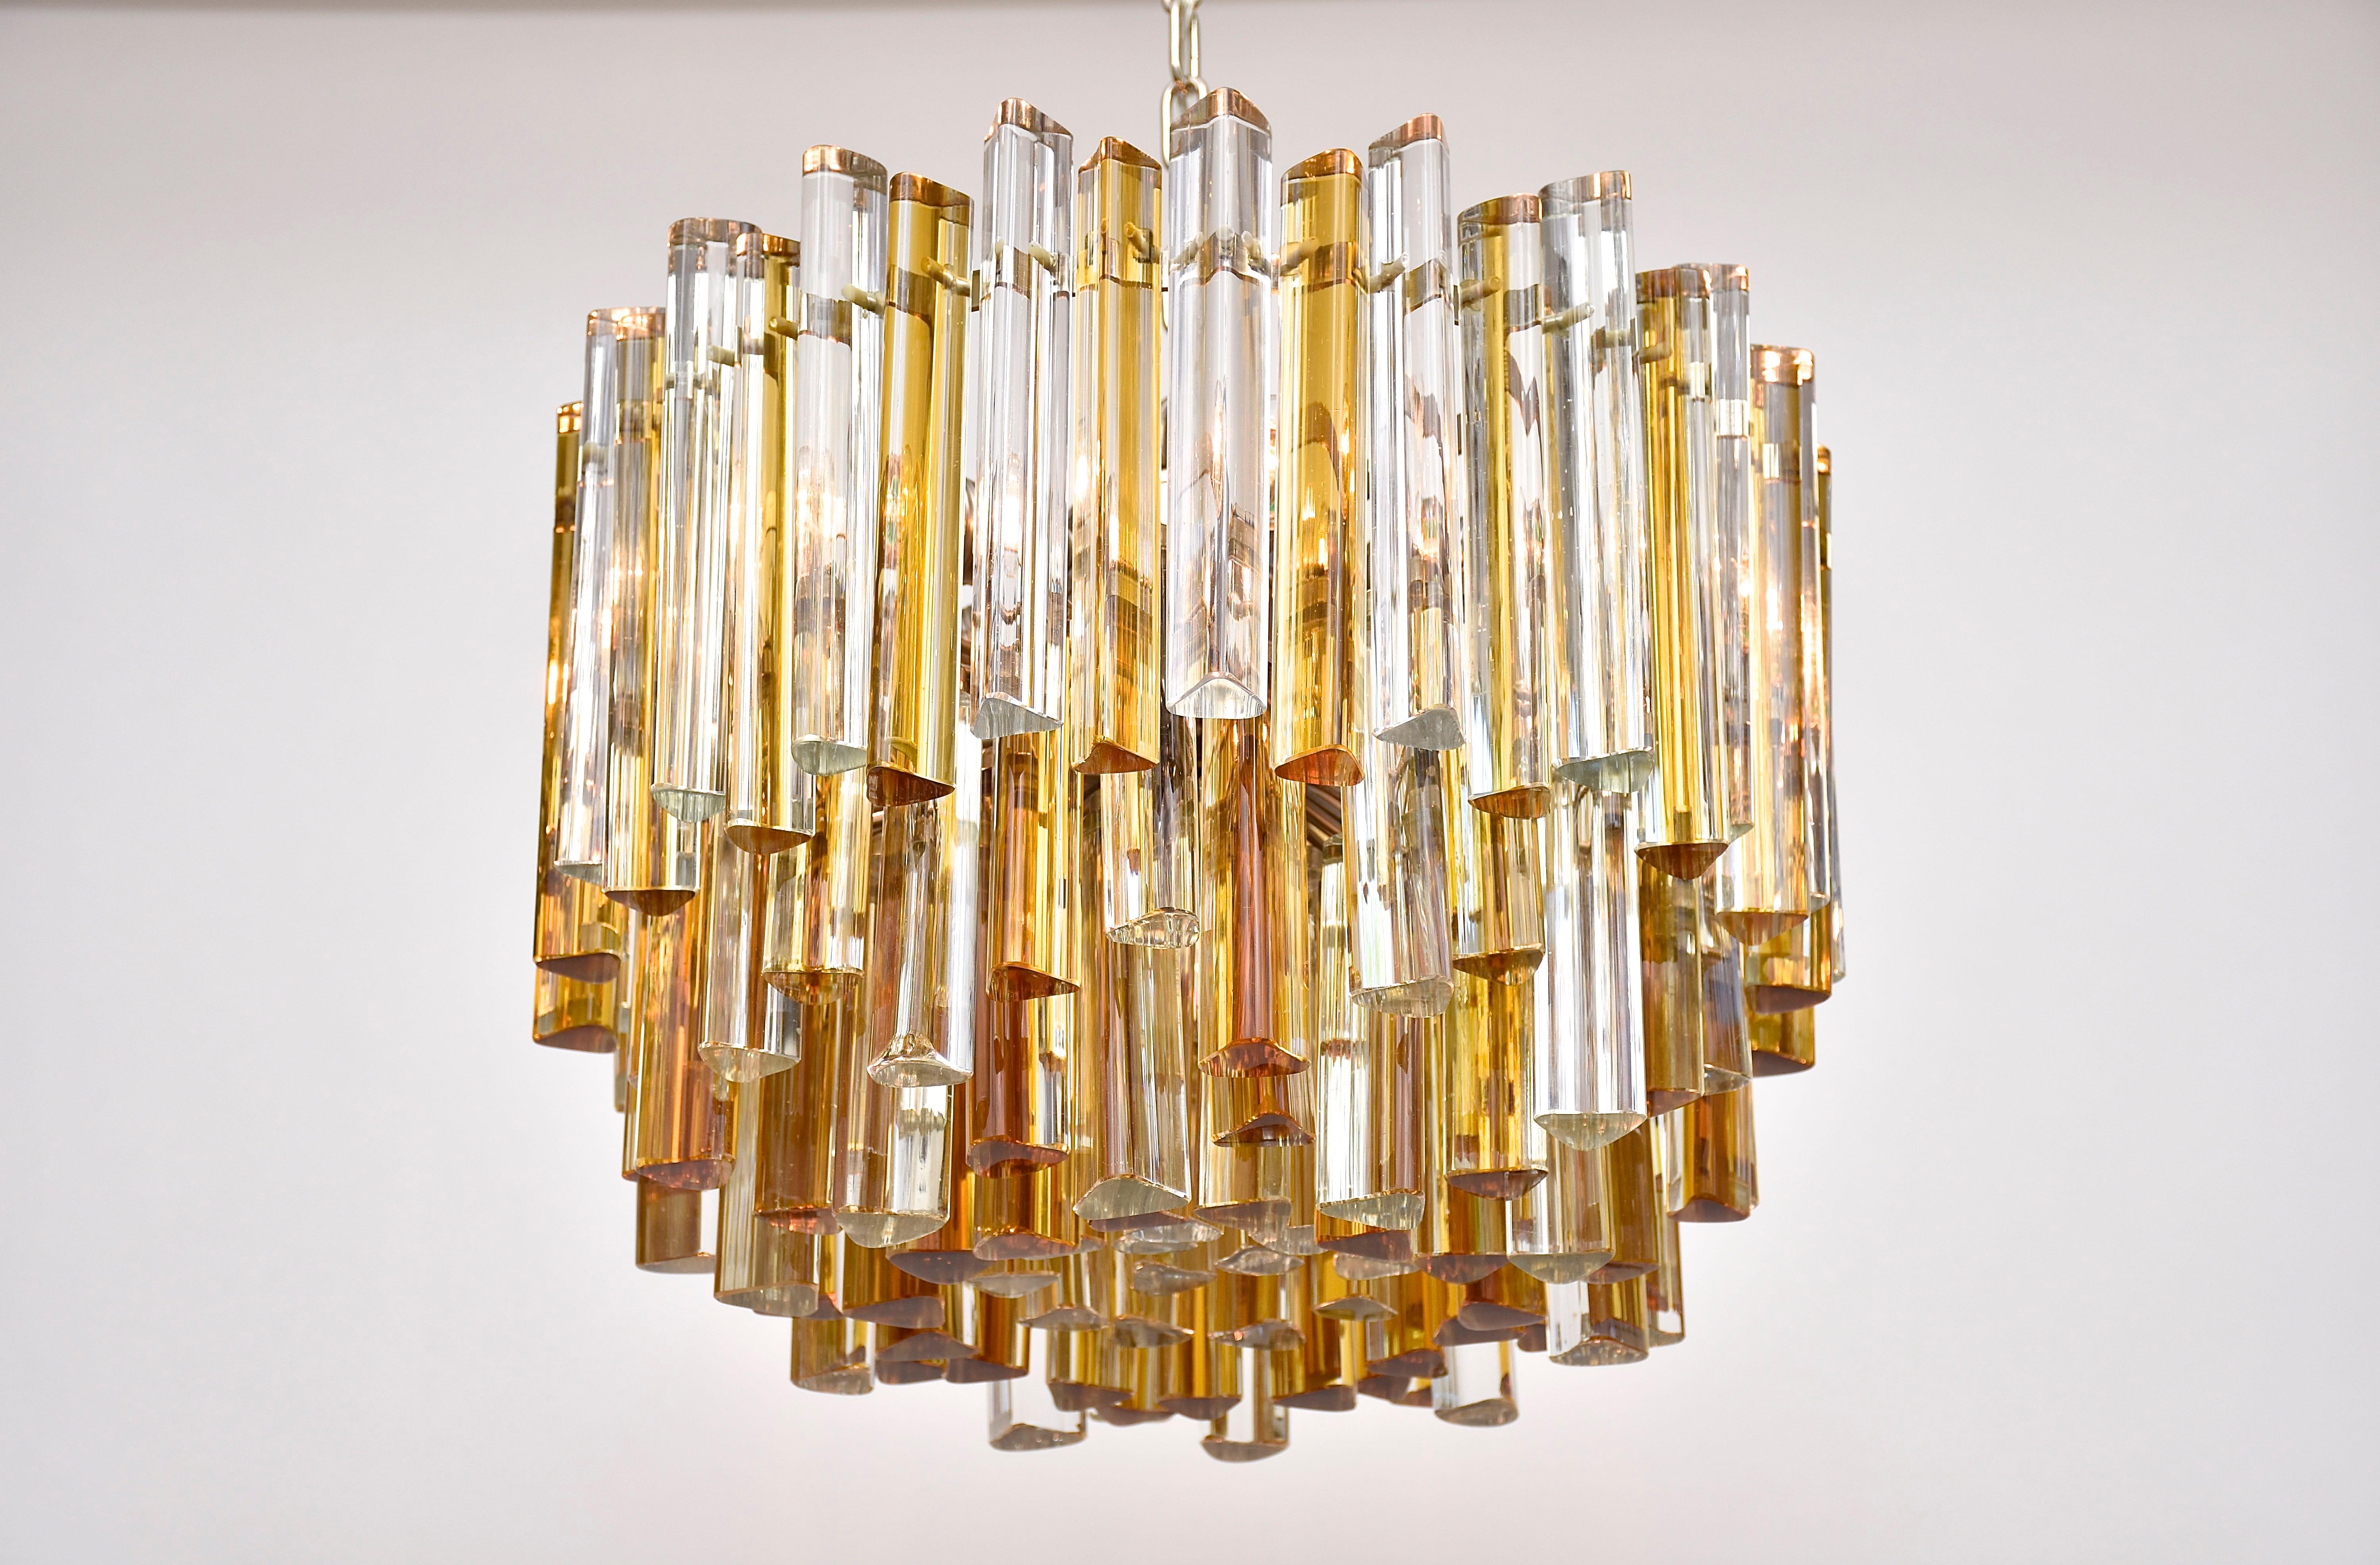 A beautiful Murano chandelier by Venini.
With 6 lights.
Model- 'Trilobo', clear and light amber coloured Murano crystals in very good condition. Strong and solid chromed frame.  
Period- 1970, mid-century modern
Place of origin- Italy
